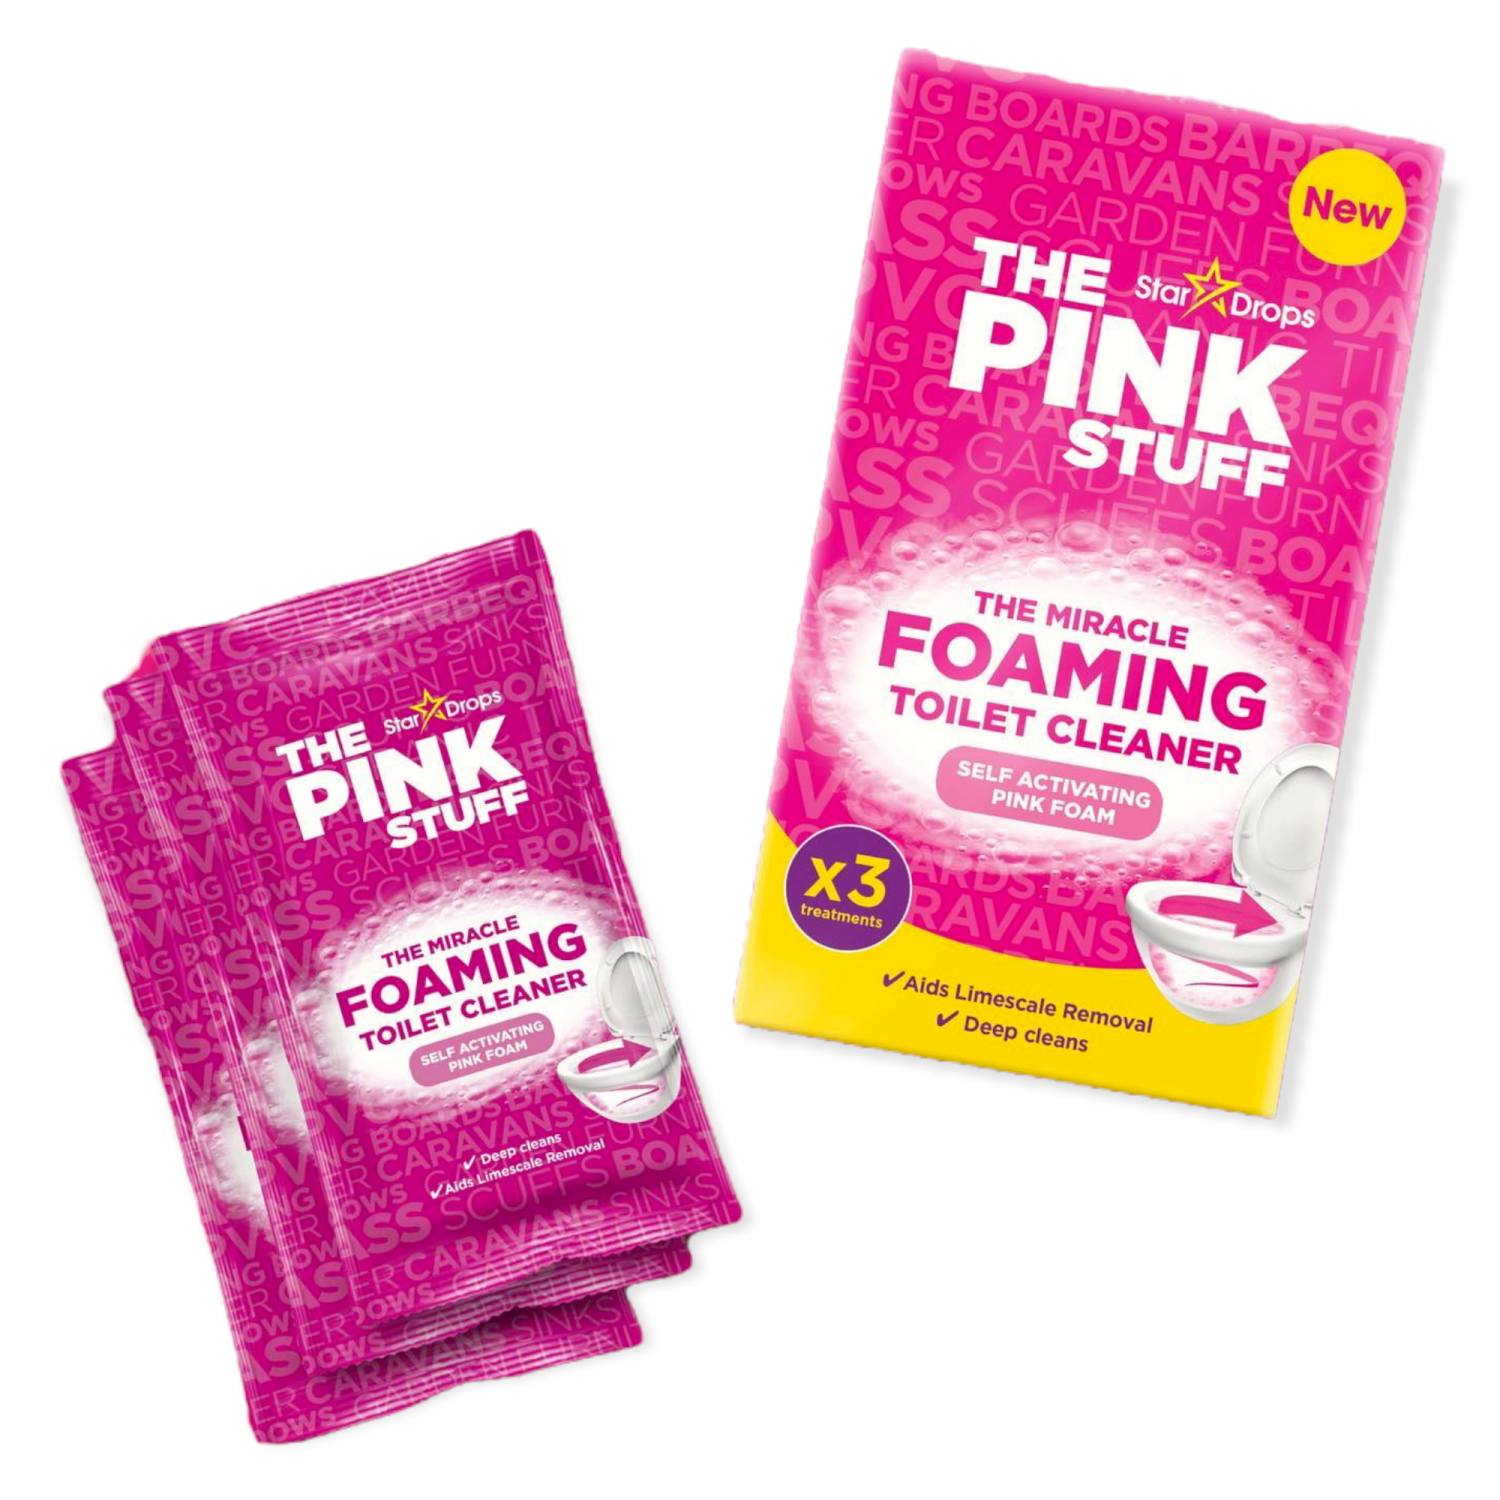 The Pink Stuff Miracle Foaming Toilet Cleaner 300g.